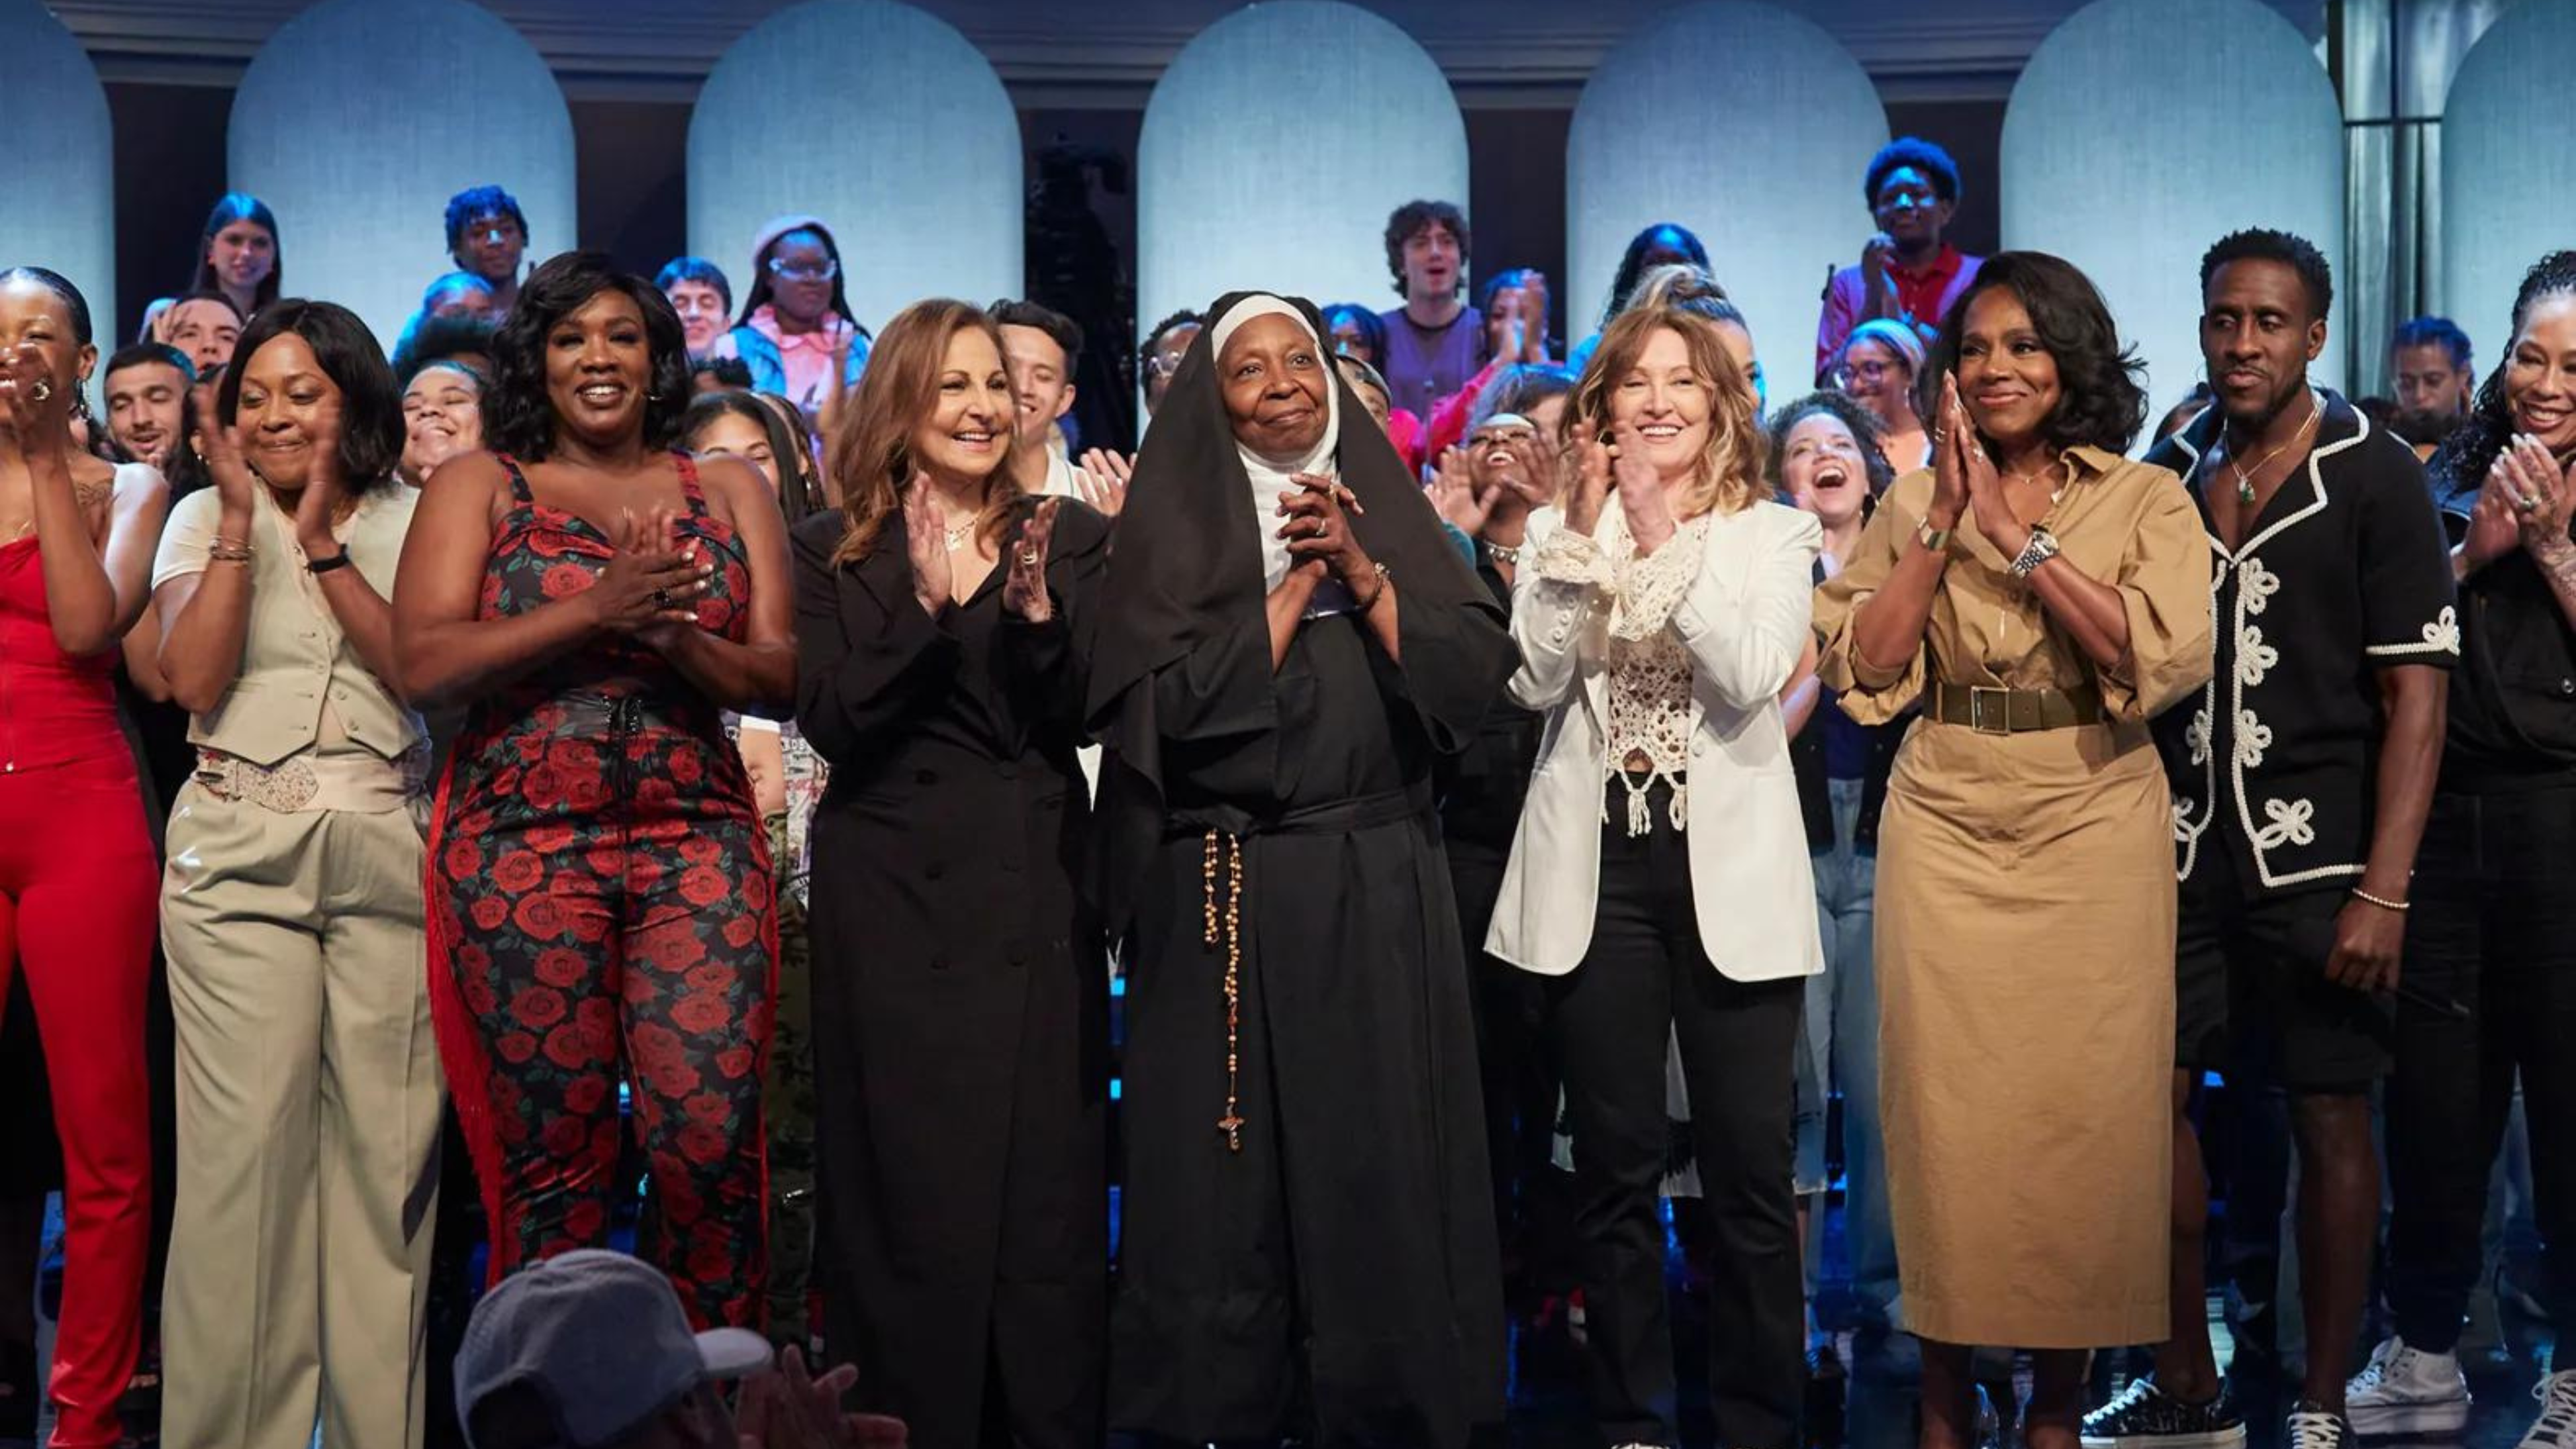 Whoopi Goldberg reunites with 'Sister Act 2' cast to celebrate the 30th anniversary on 'The View'